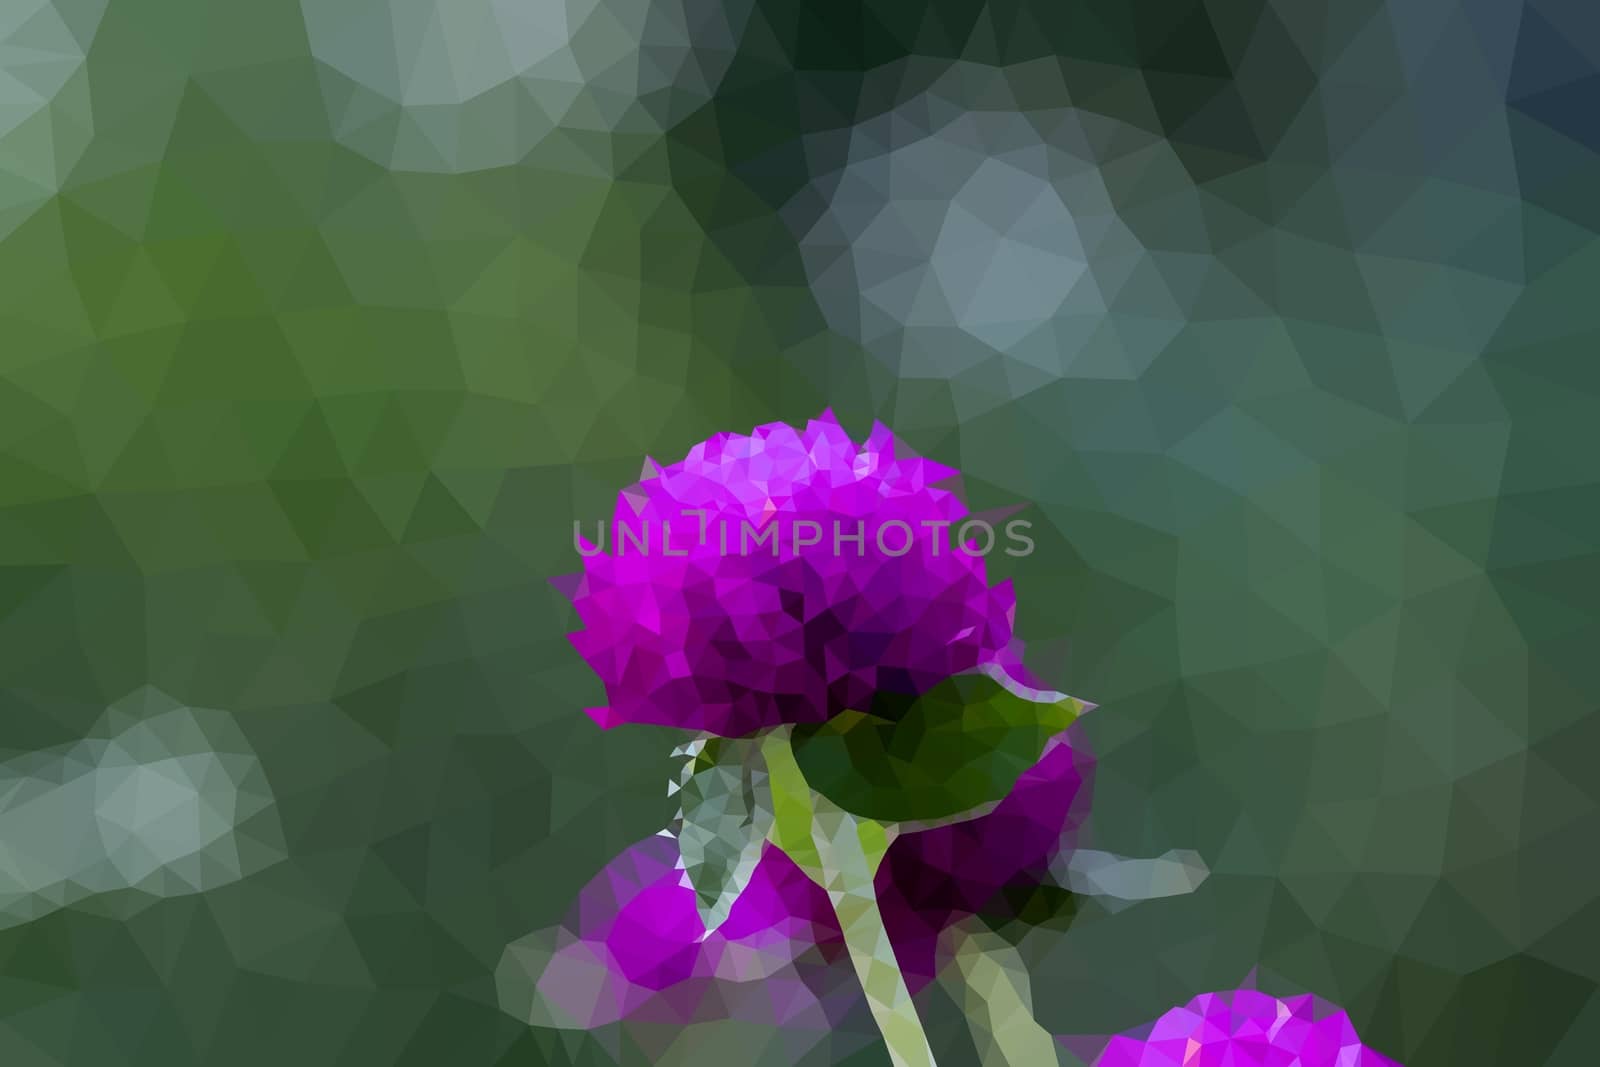 The Abstract Triangles flowers of Purple Grobe Amaranth or Bachelor's Button